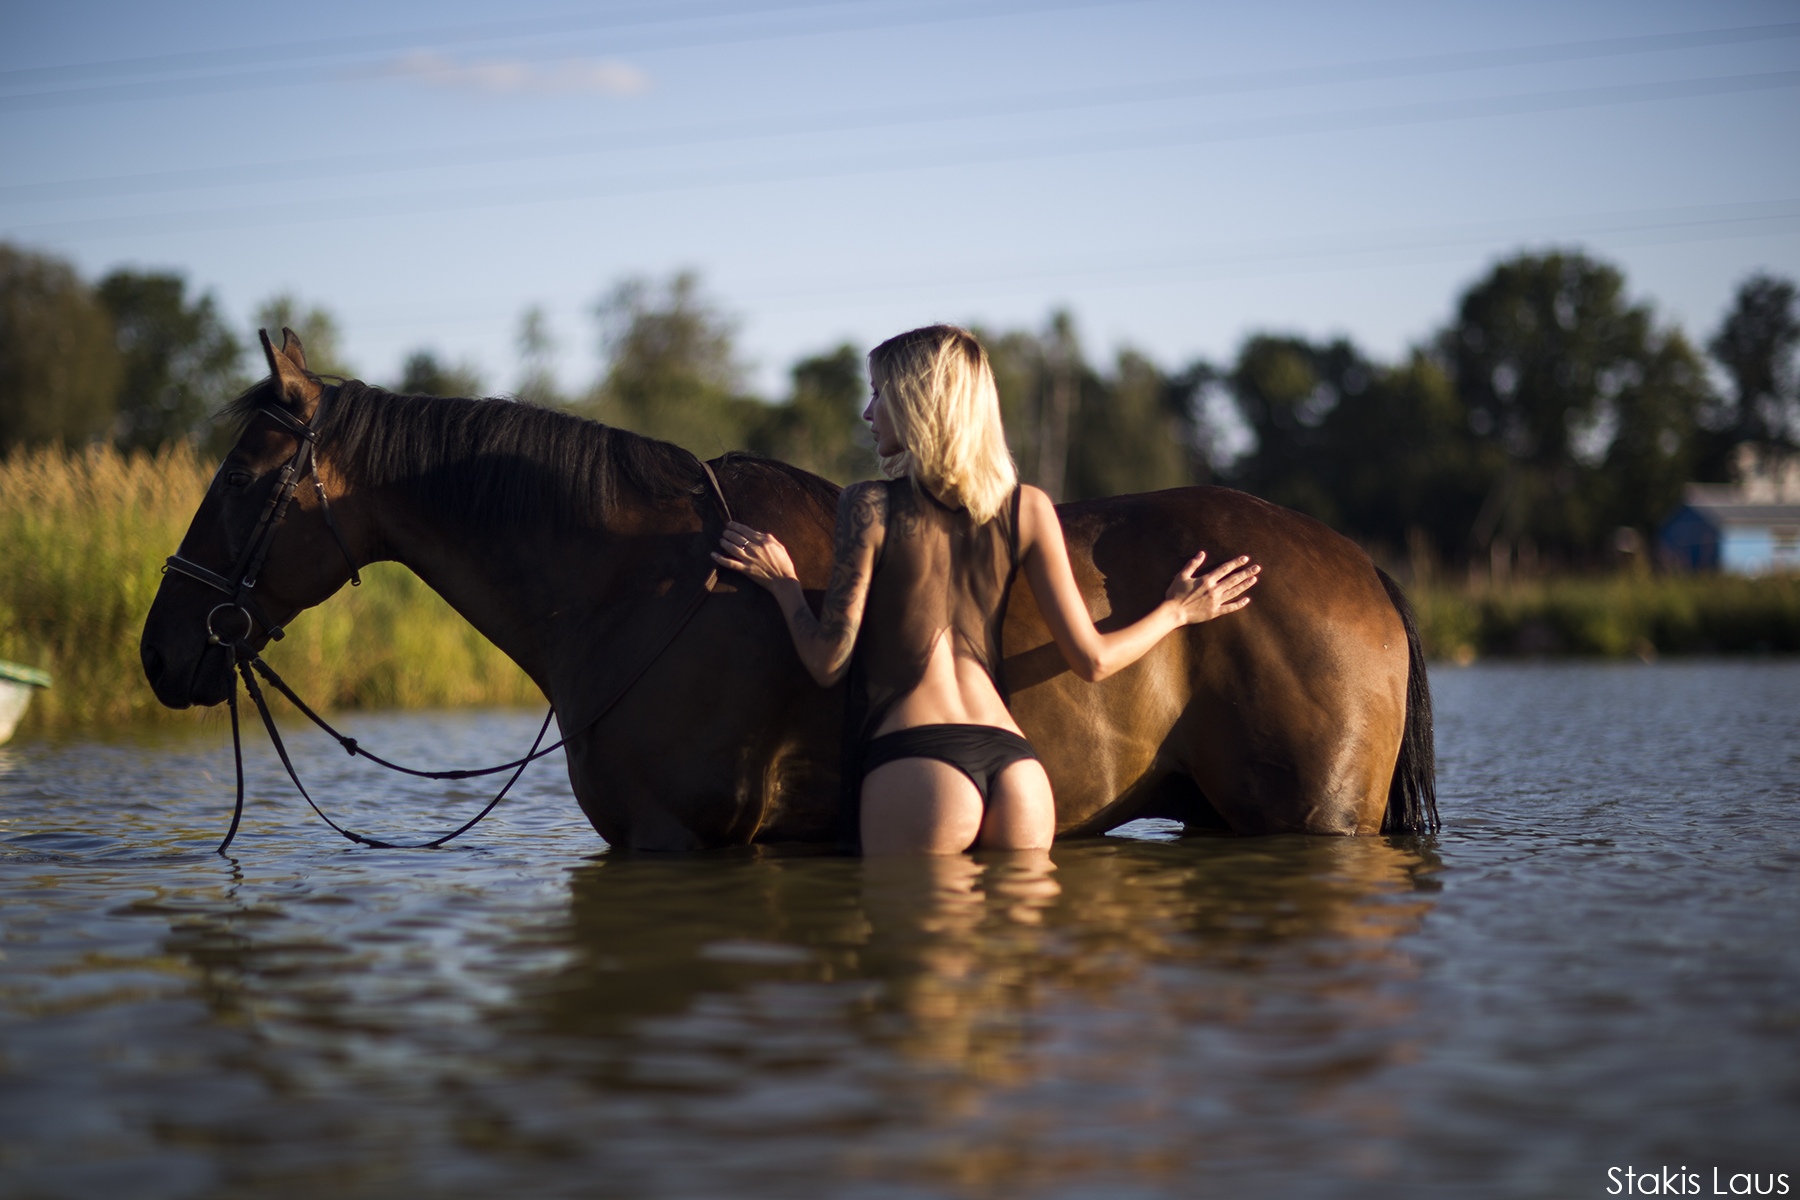 People 1800x1200 Anna Zajarova Stakis Laus blonde horse river ass back tattoo women women with horse outdoors women outdoors black panties topless arched back